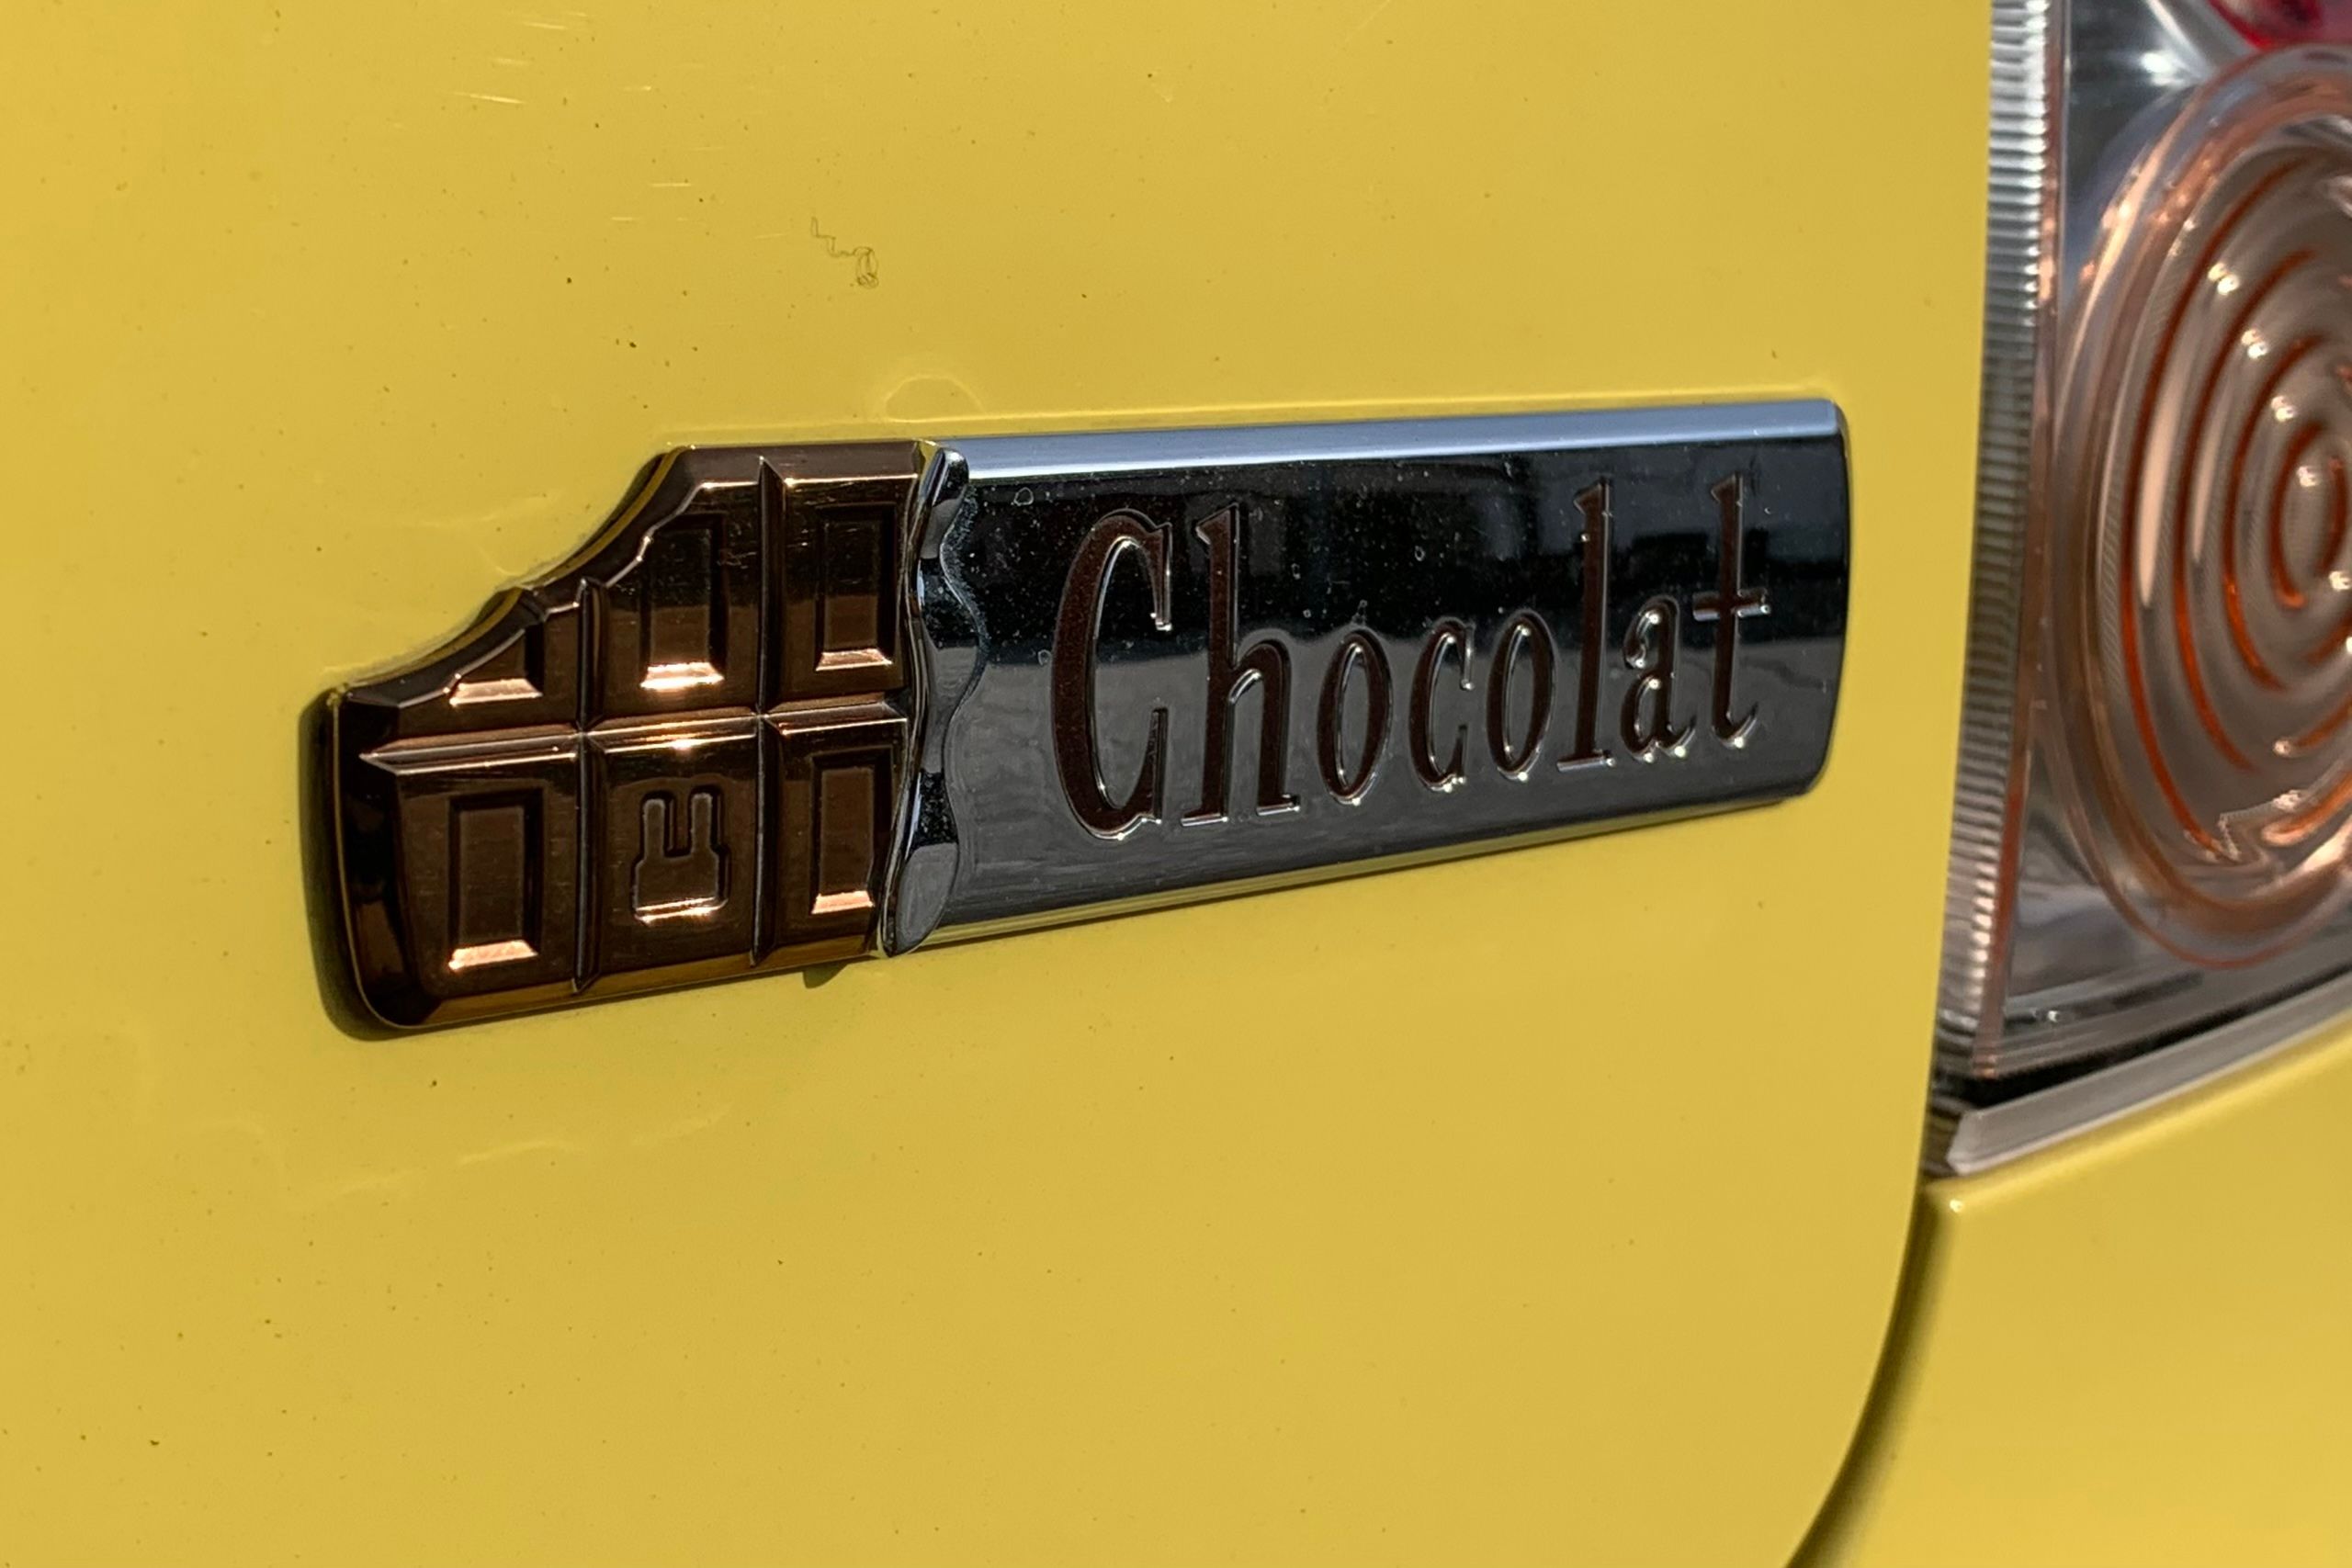 The emblem of the yellow car, a Lapin Chocolat, is a partially eaten chocolate bar with one of its squares stamped with the silhouelle of a rabbit.